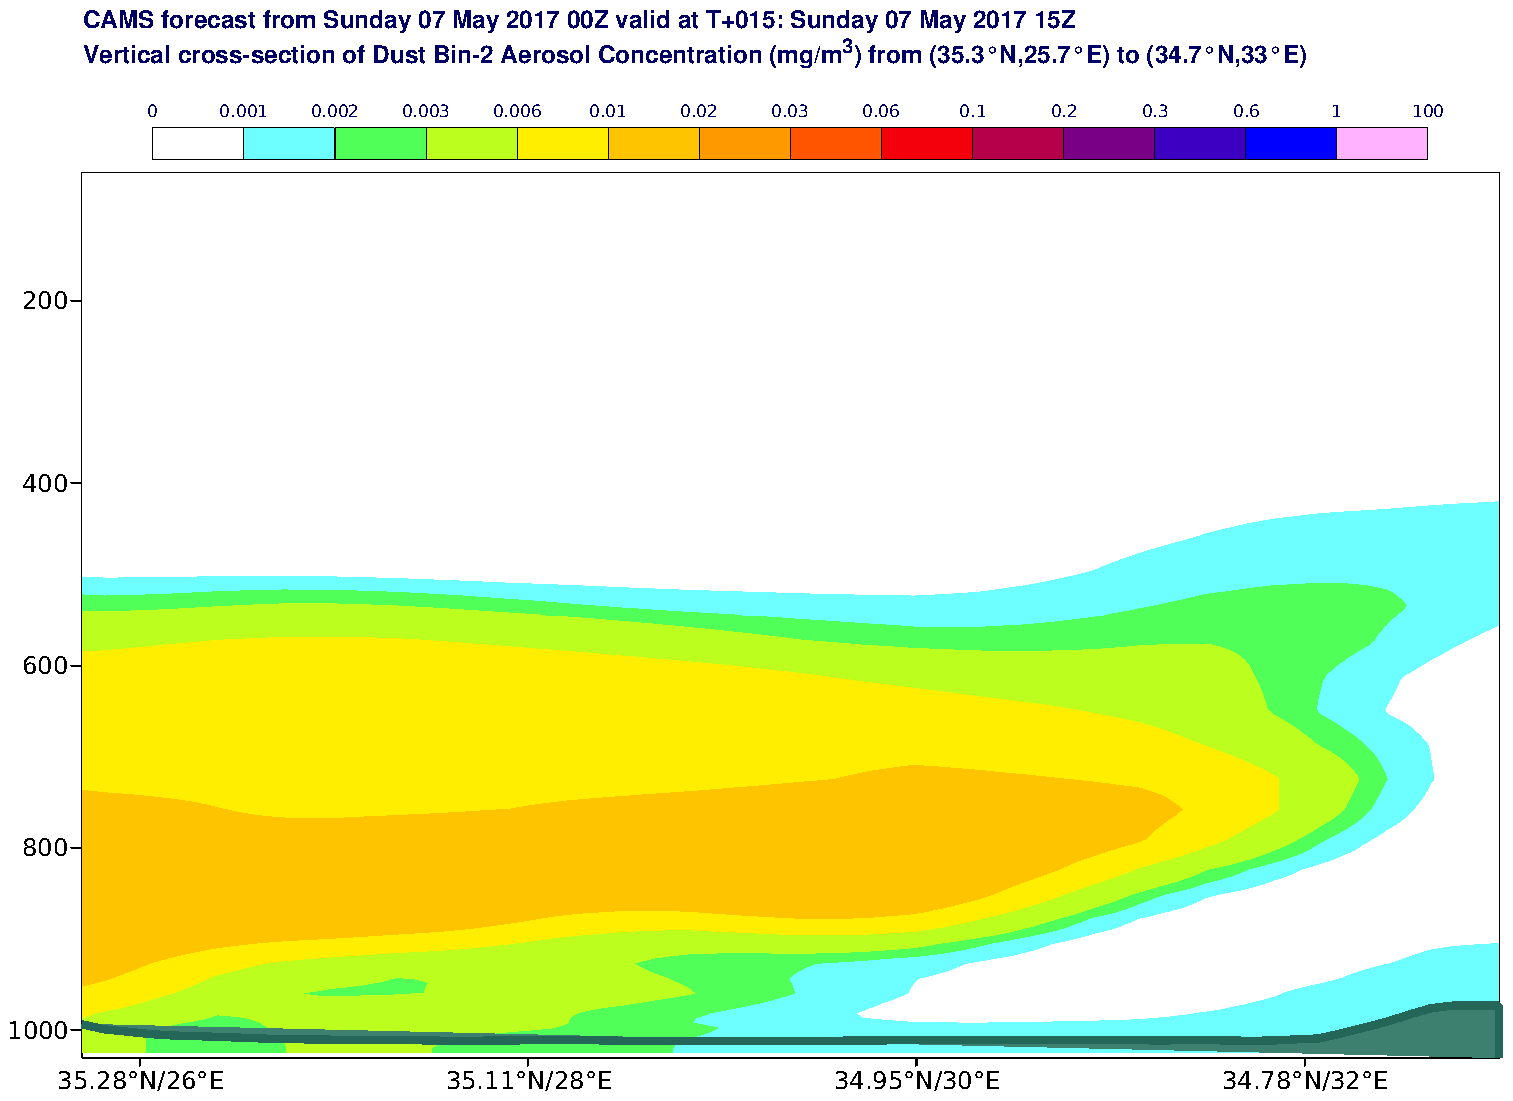 Vertical cross-section of Dust Bin-2 Aerosol Concentration (mg/m3) valid at T15 - 2017-05-07 15:00